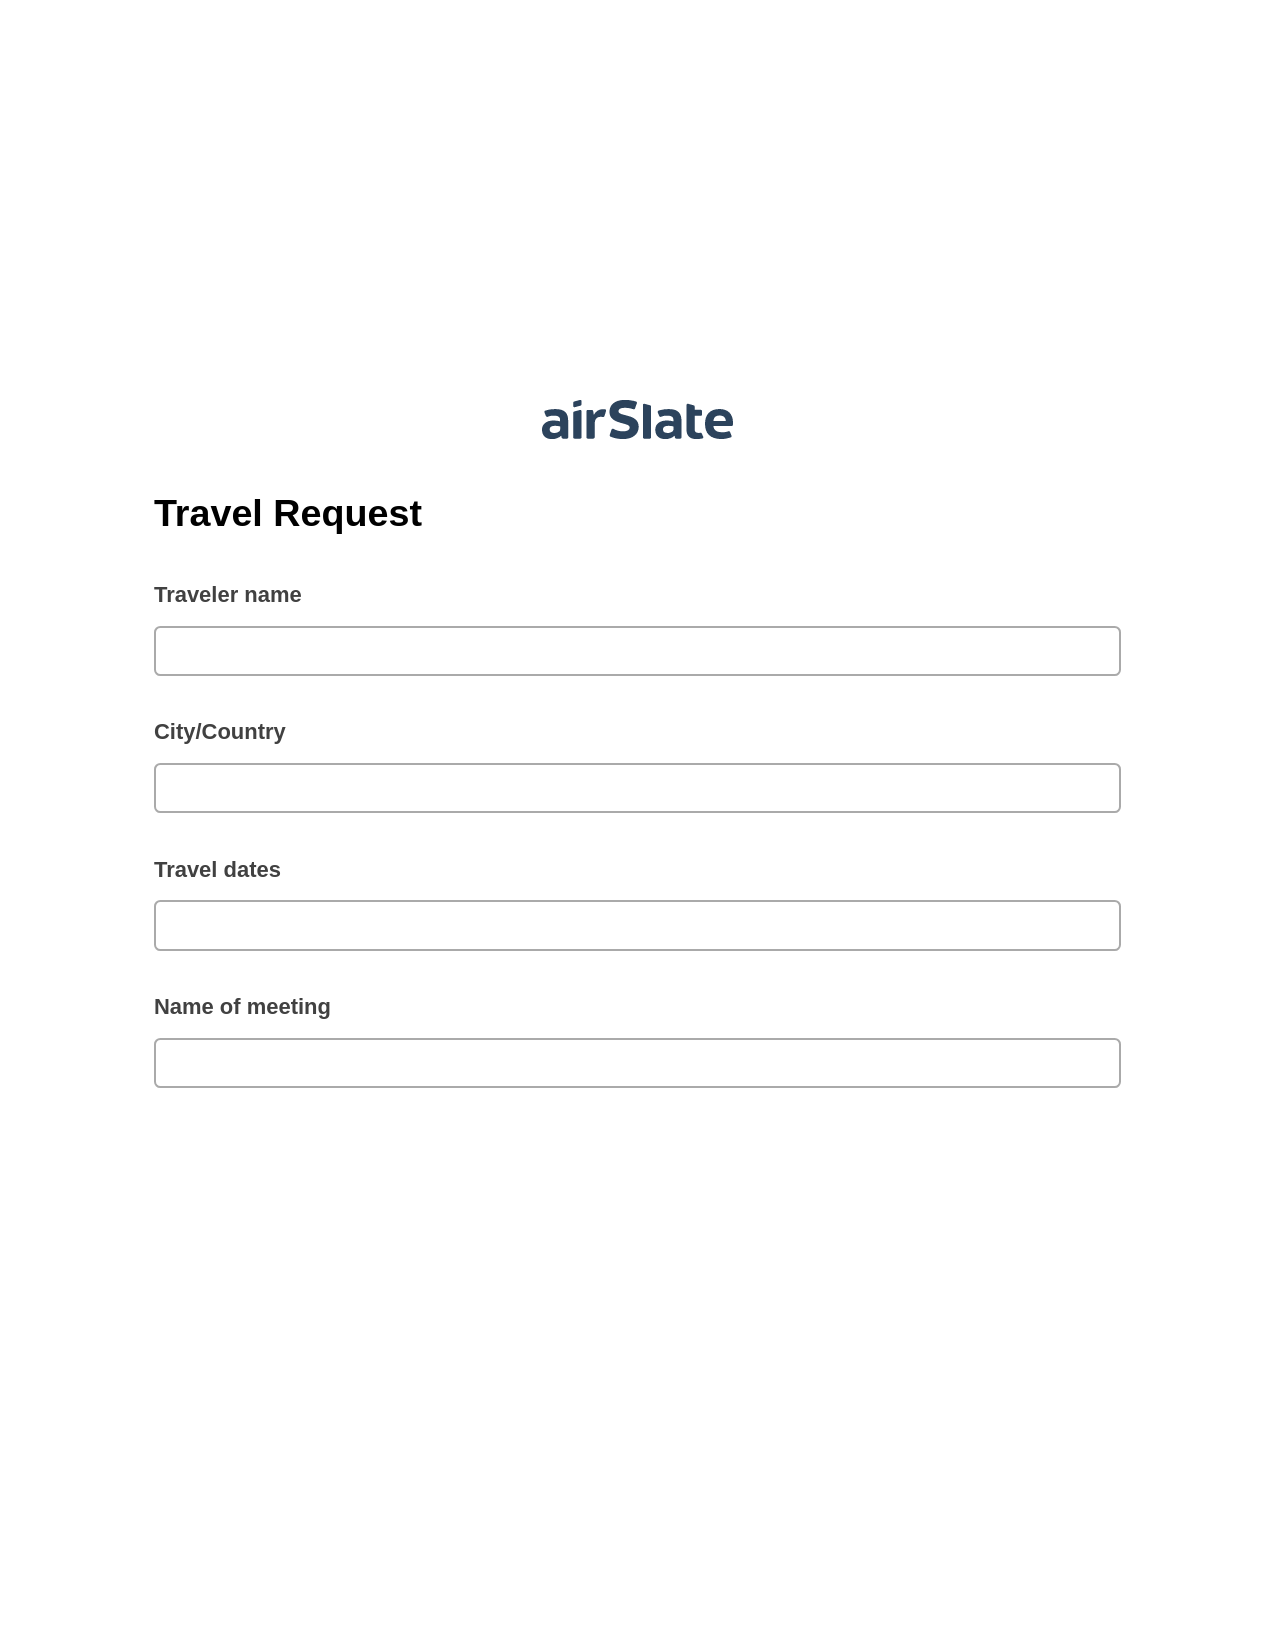 Multirole Travel Request Pre-fill Dropdowns from CSV File Bot, Create Slate Reminder Bot, Archive to SharePoint Folder Bot